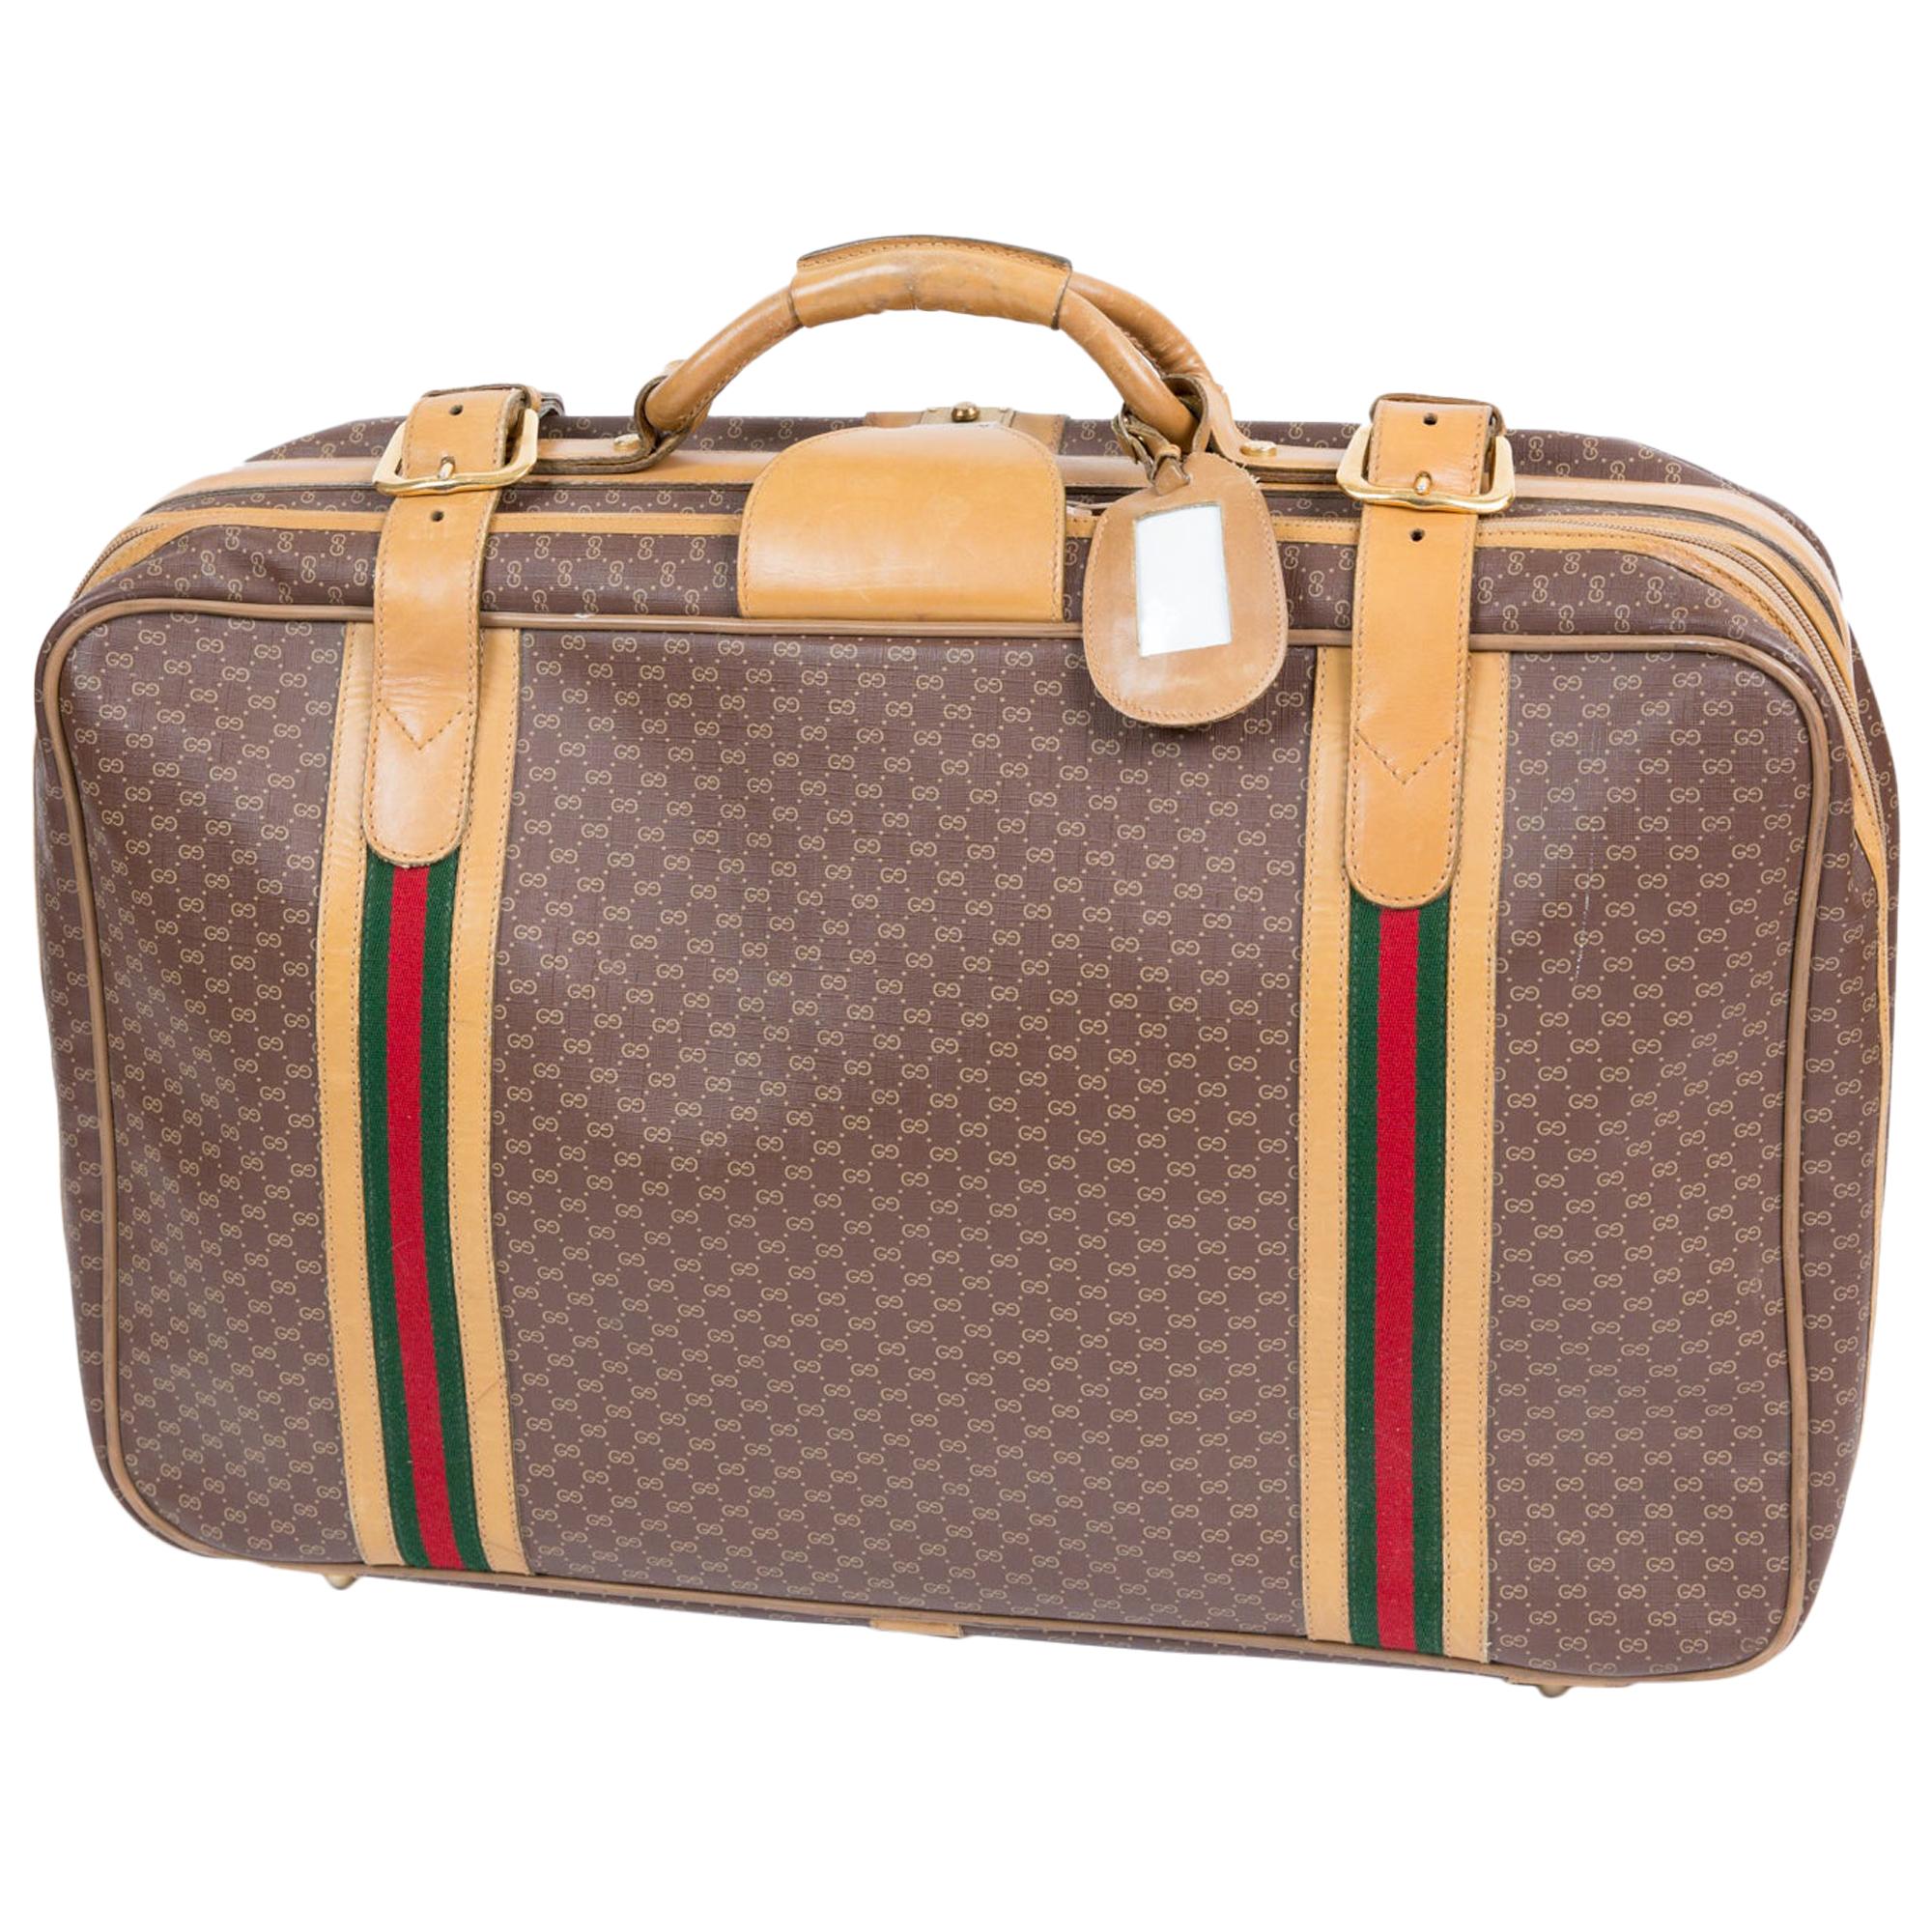 Gucci Coffee Brown GG Supreme Coated Canvas Travel Suitcase